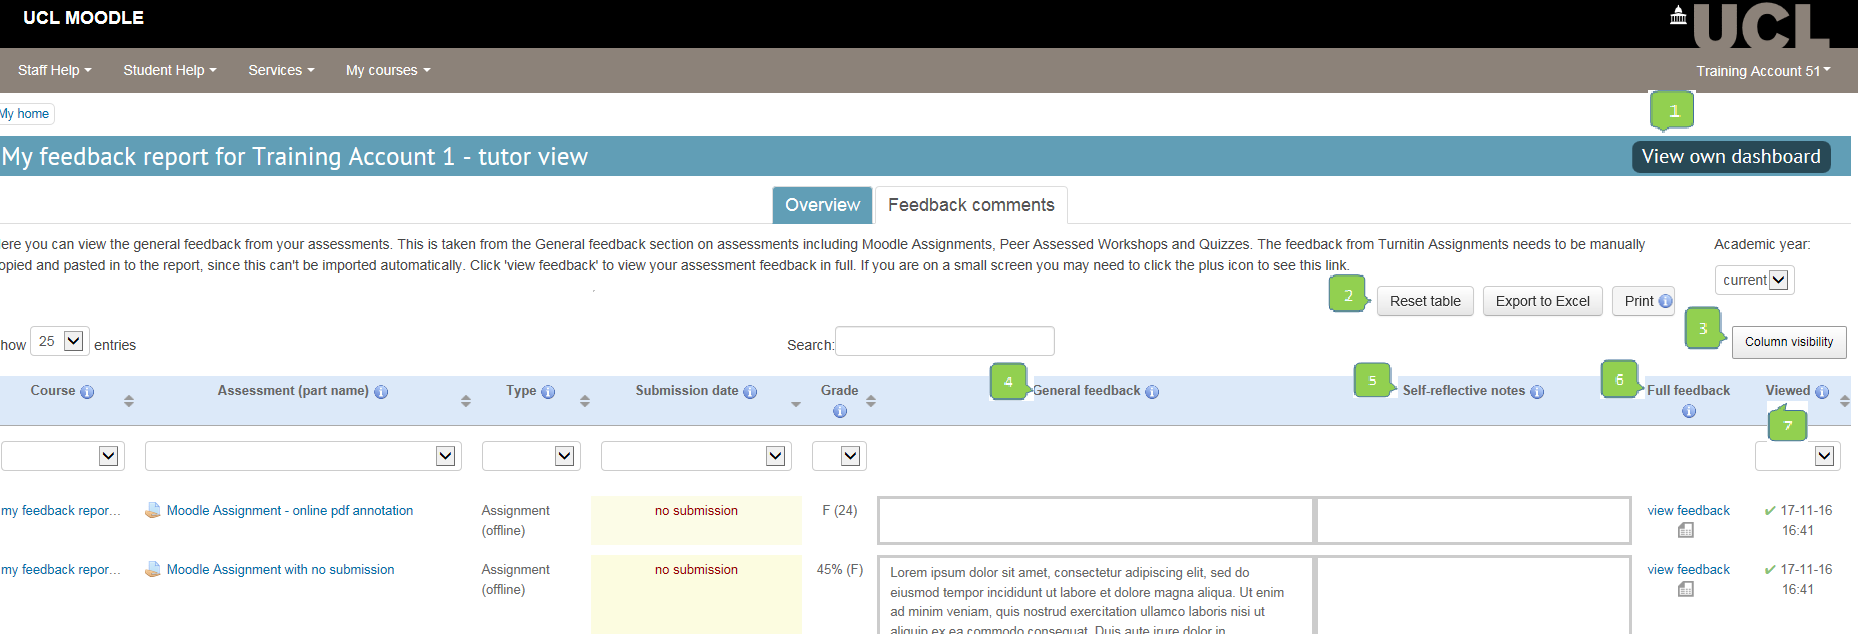 Feedback comments tab showing assessments, grades and feedback